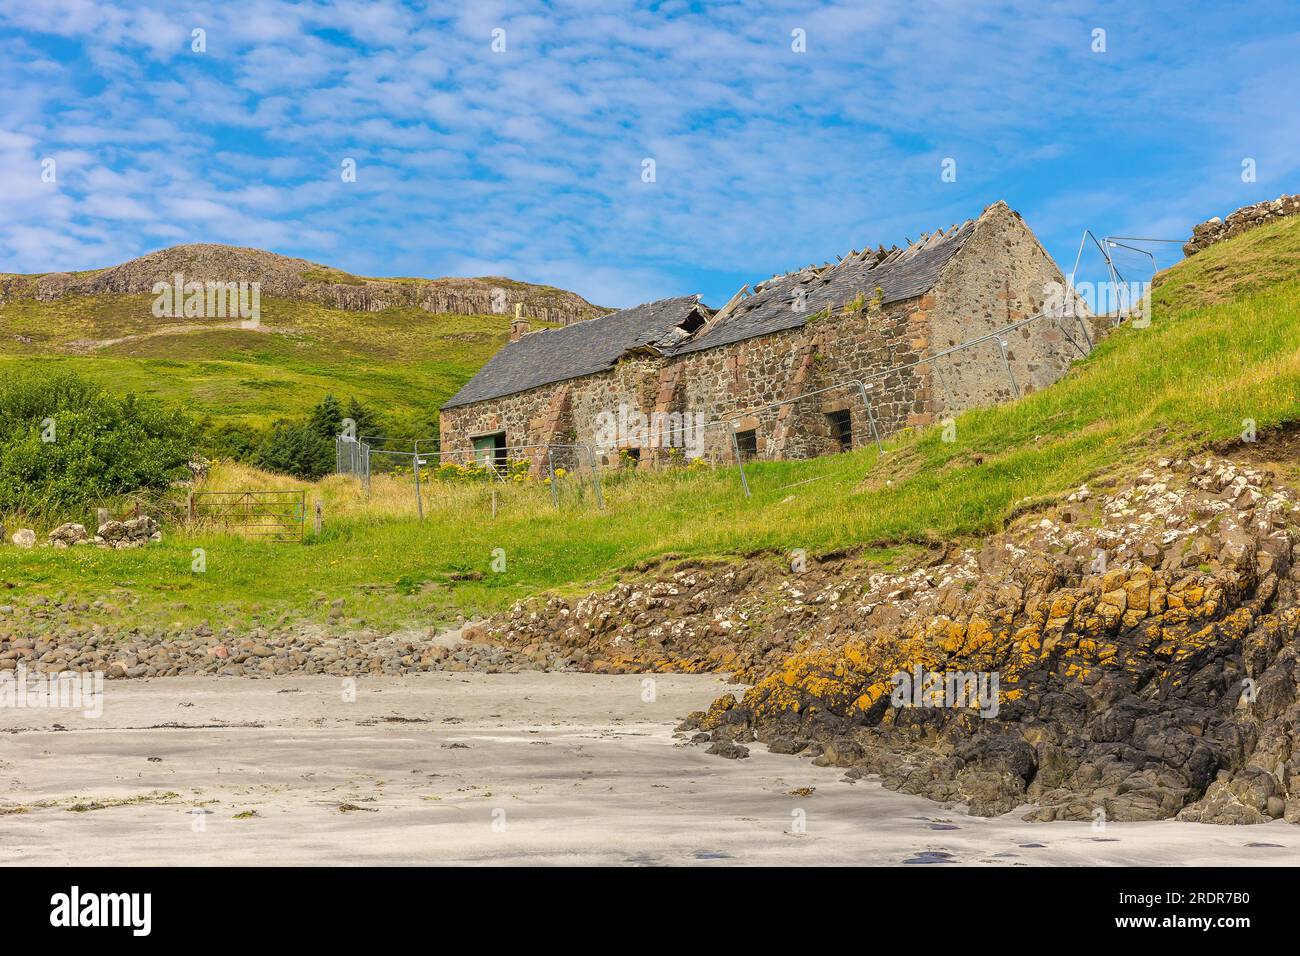 Coroghan Barn, Isle of Canna, Scotland. A Community Project on the Isle of Canna to repurpose and retain a delapidated barn into a barn which meets mo Stock Photo